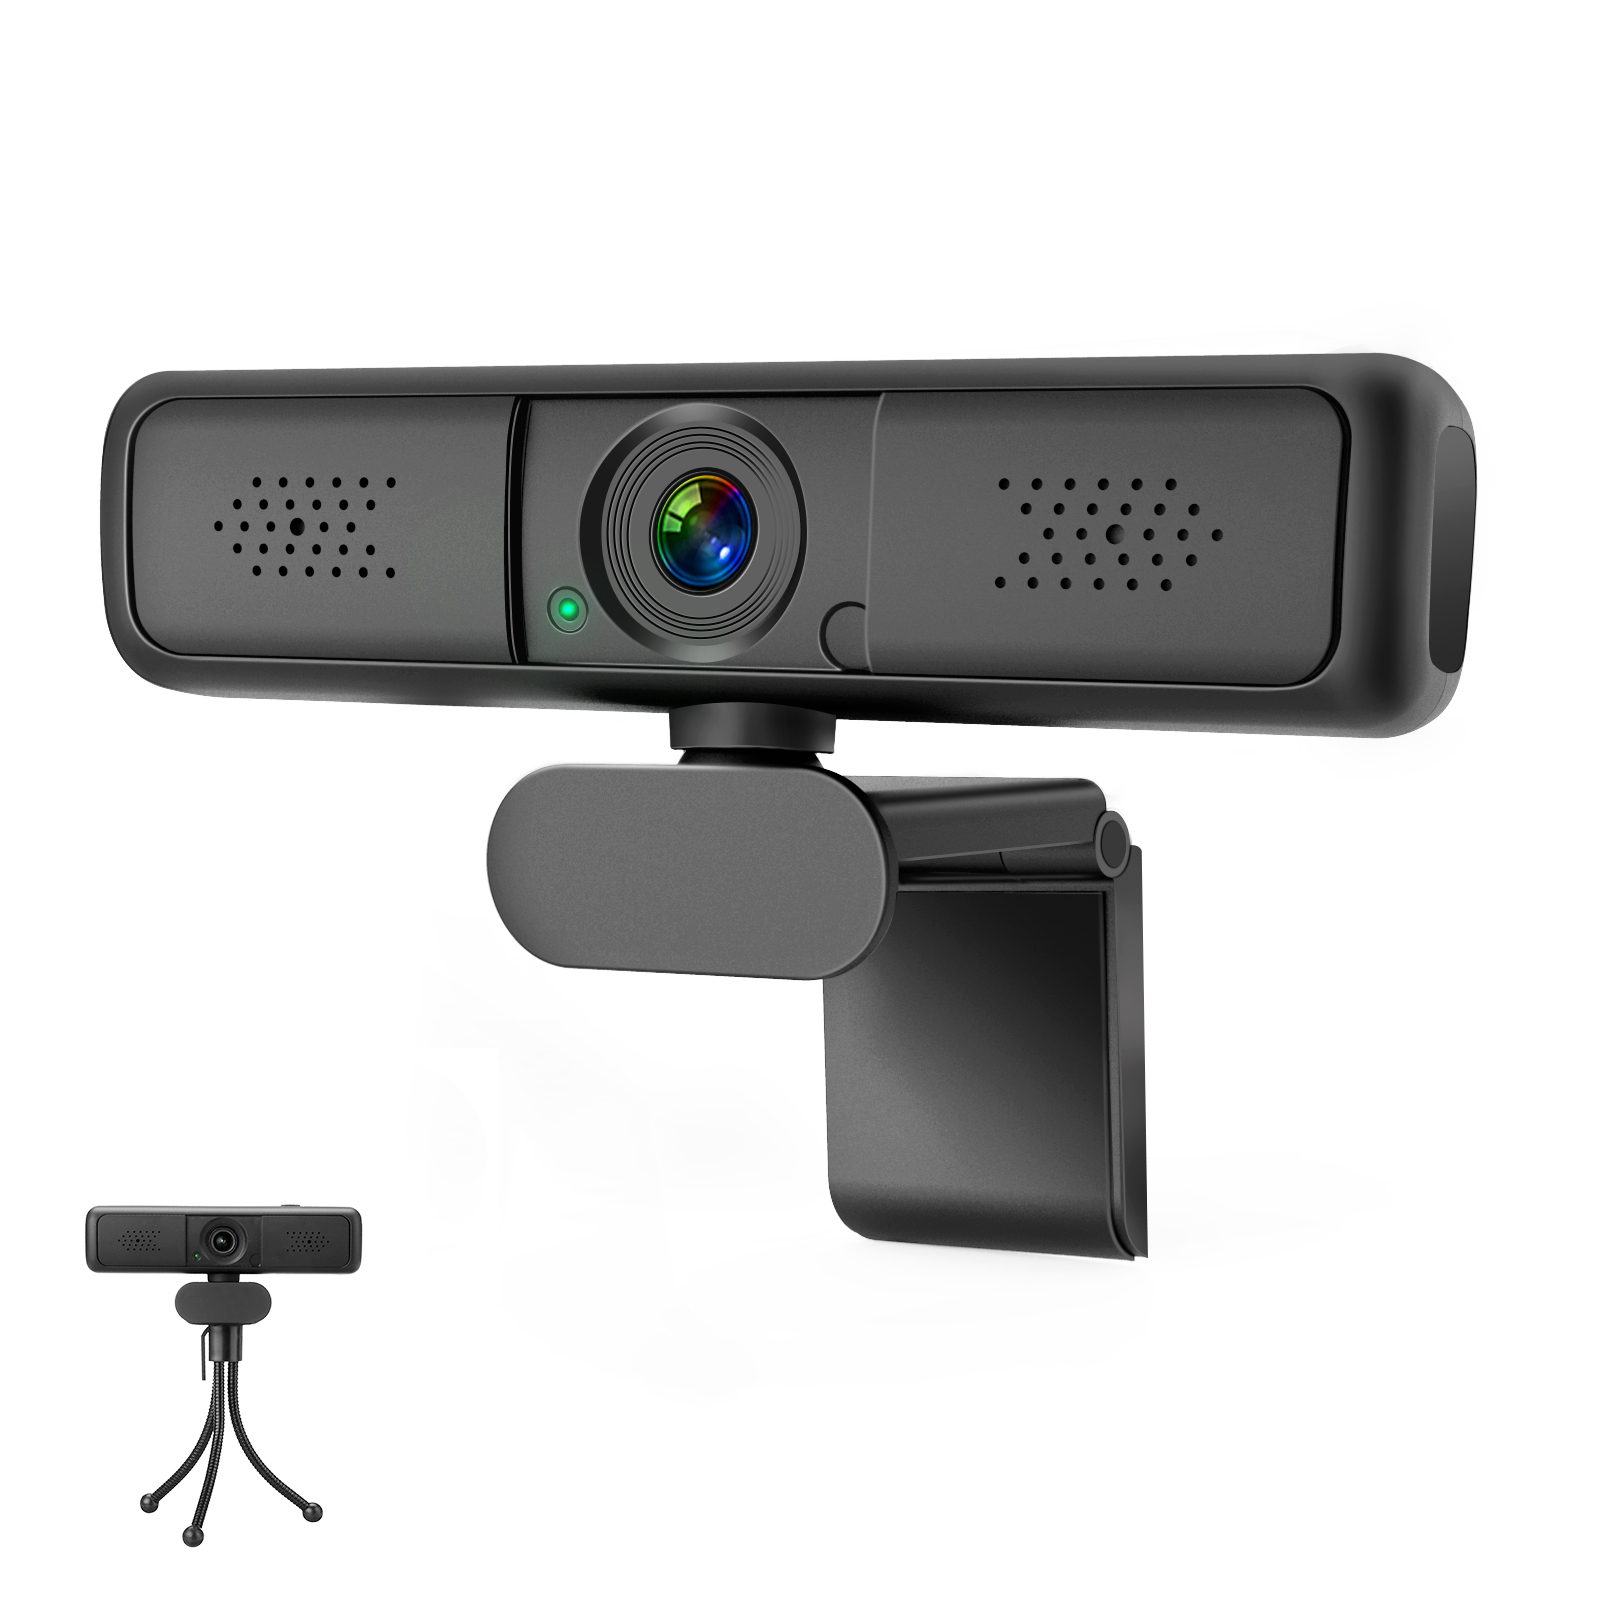 MECO-ELE-2K-HD-1440P-Webcam-Auto-Focus-Light-Correction-Built-in-Stereo-Microphone-Wired-USB-Compute-1937312-13